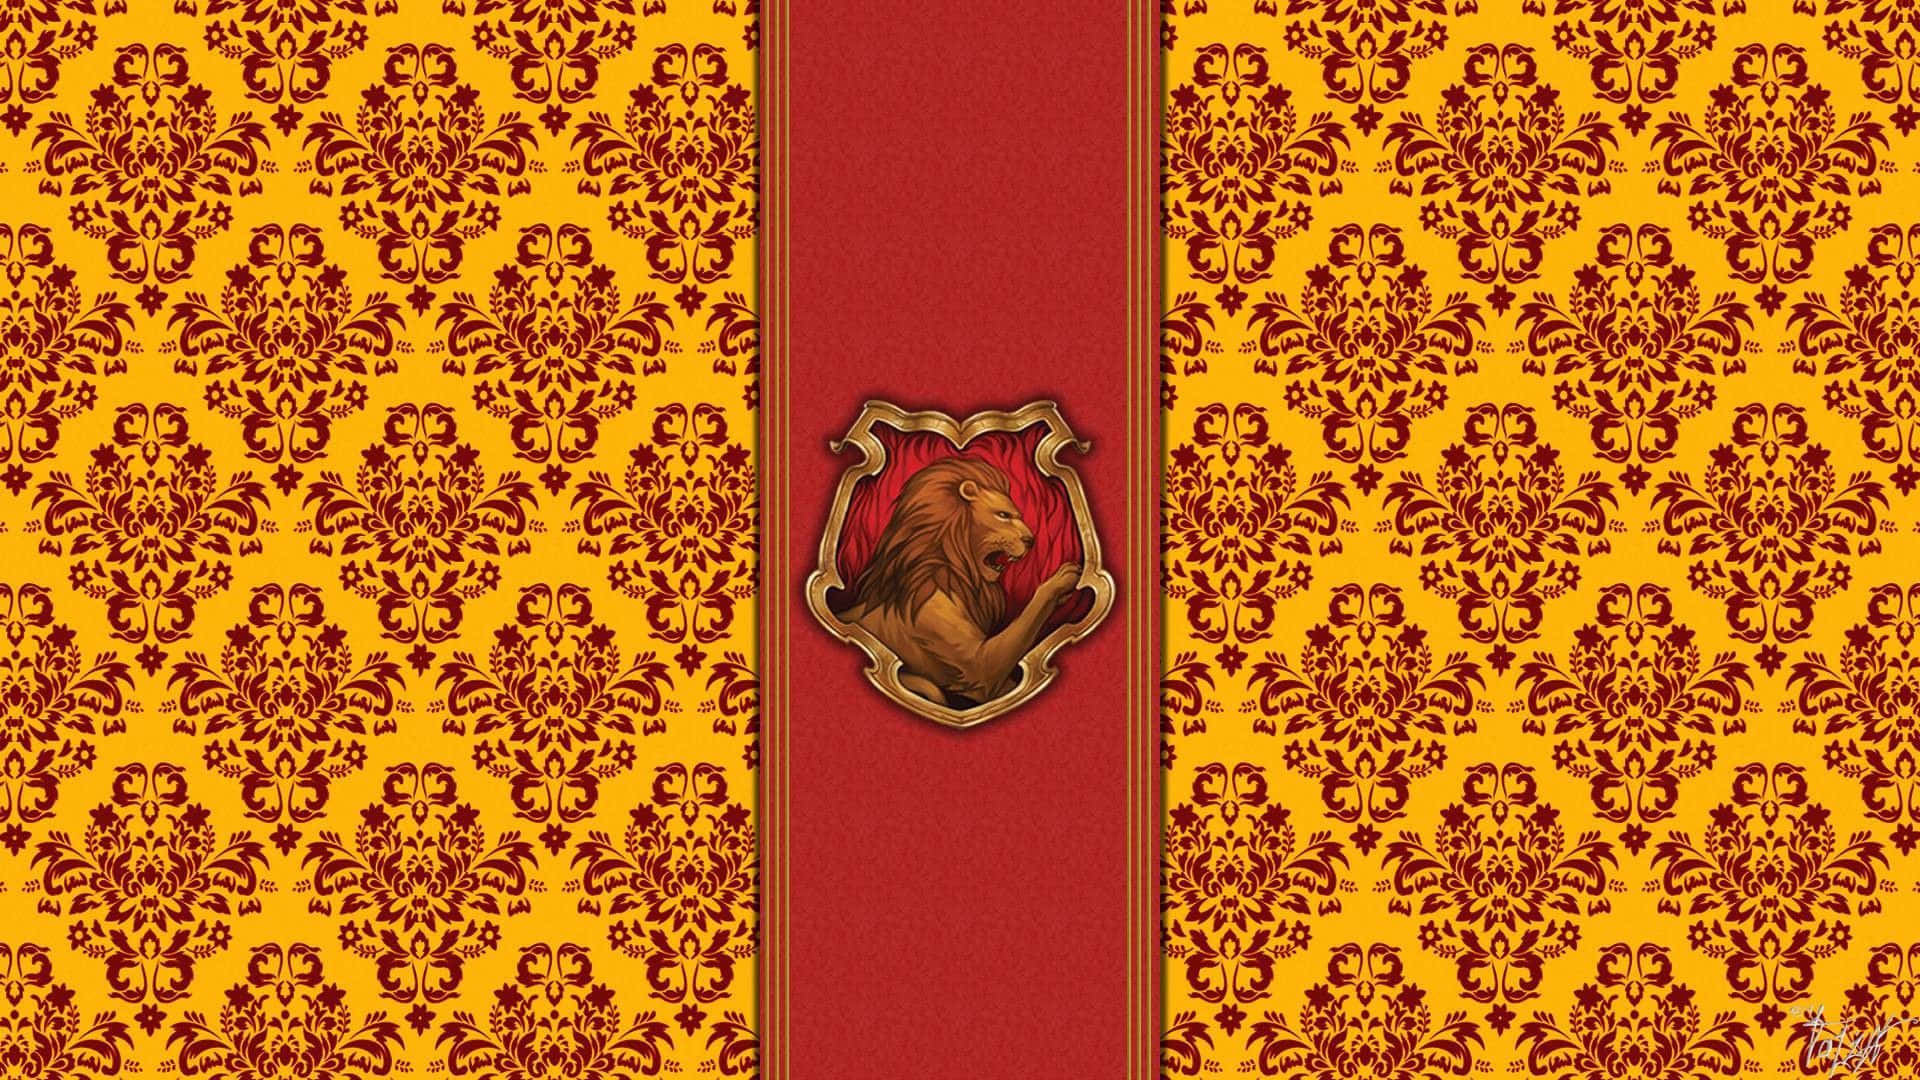 These courageous Gryffindors are Proud to Represent their House